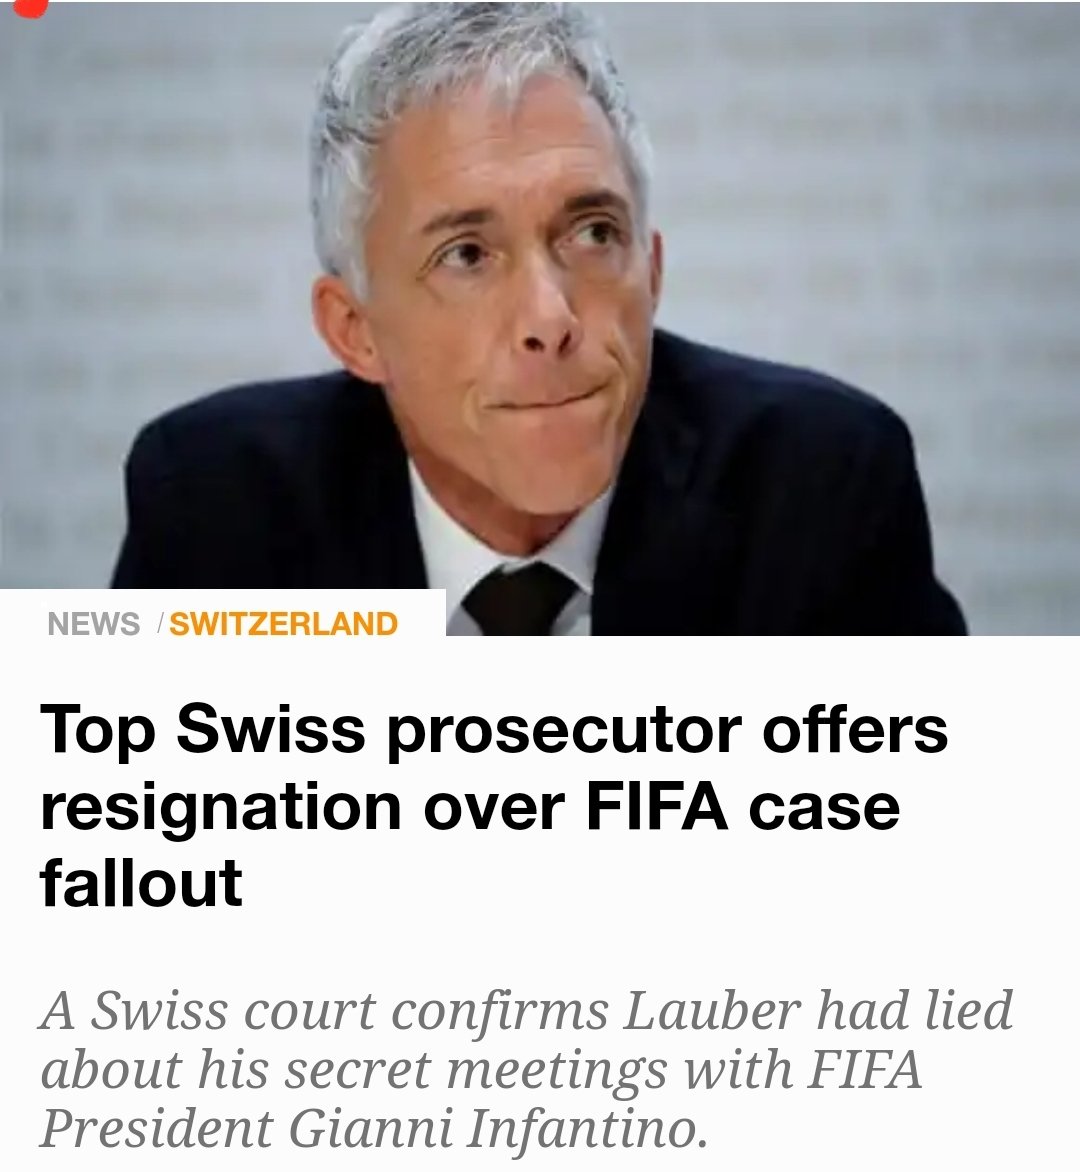 The Swiss Prosecutor General is a corrupt peice of human garbage that lied about his dealings with FIFA in official documents.He resigned and will pay a tiny fee to the Swiss public.This human-shaped turd refused to hand over the original lavo jato docs to Lula's lawyers.